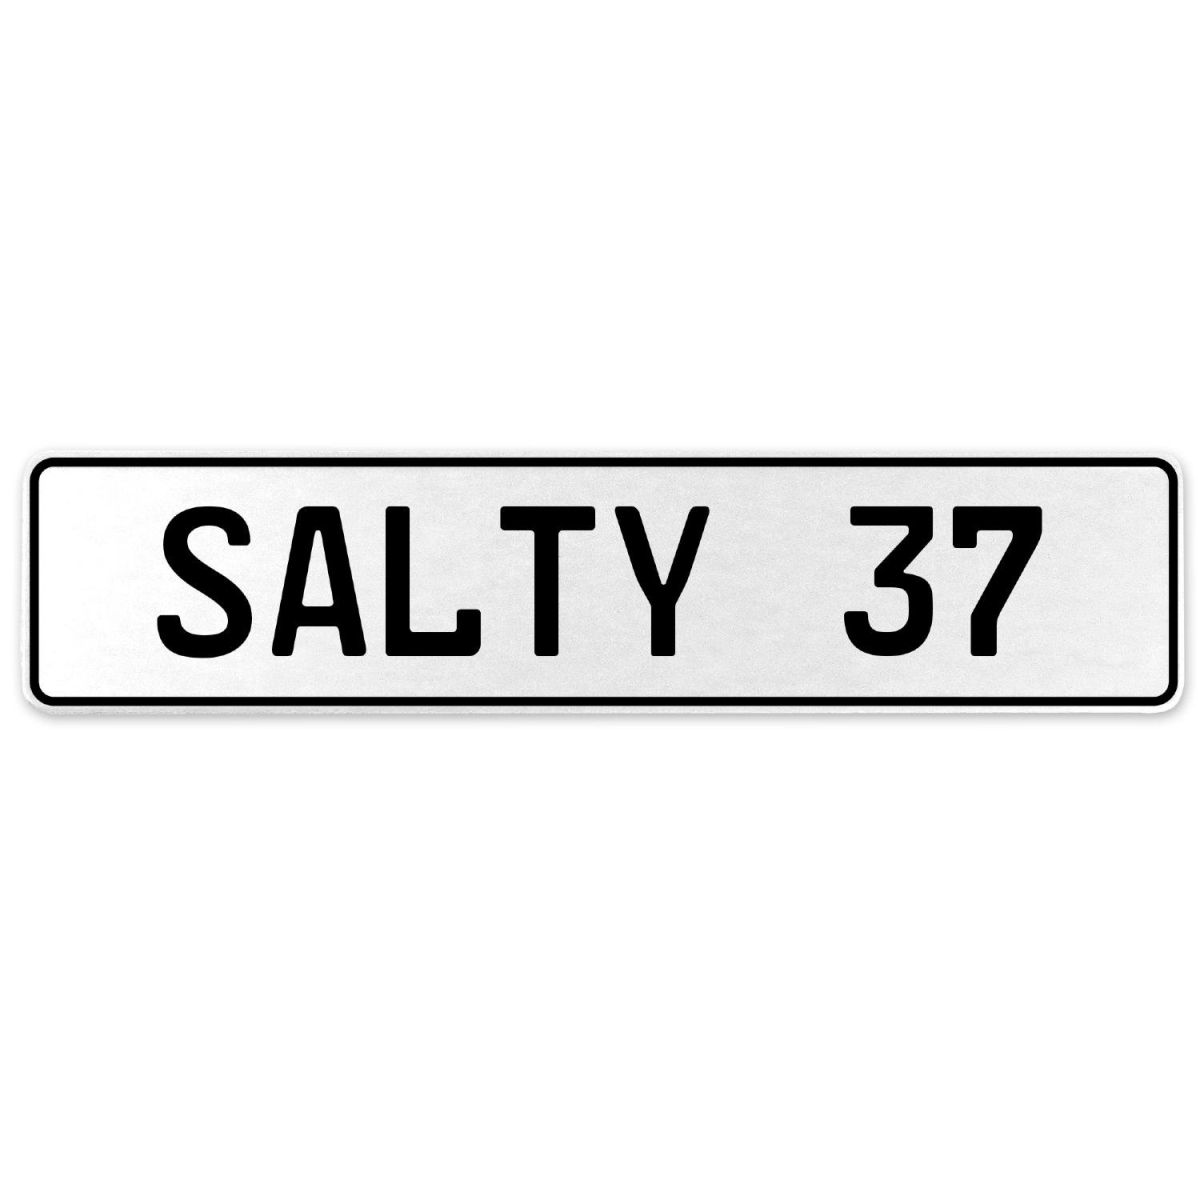 Salty 37 - White Aluminum Street Sign Mancave Euro Plate Name Door Sign Wall